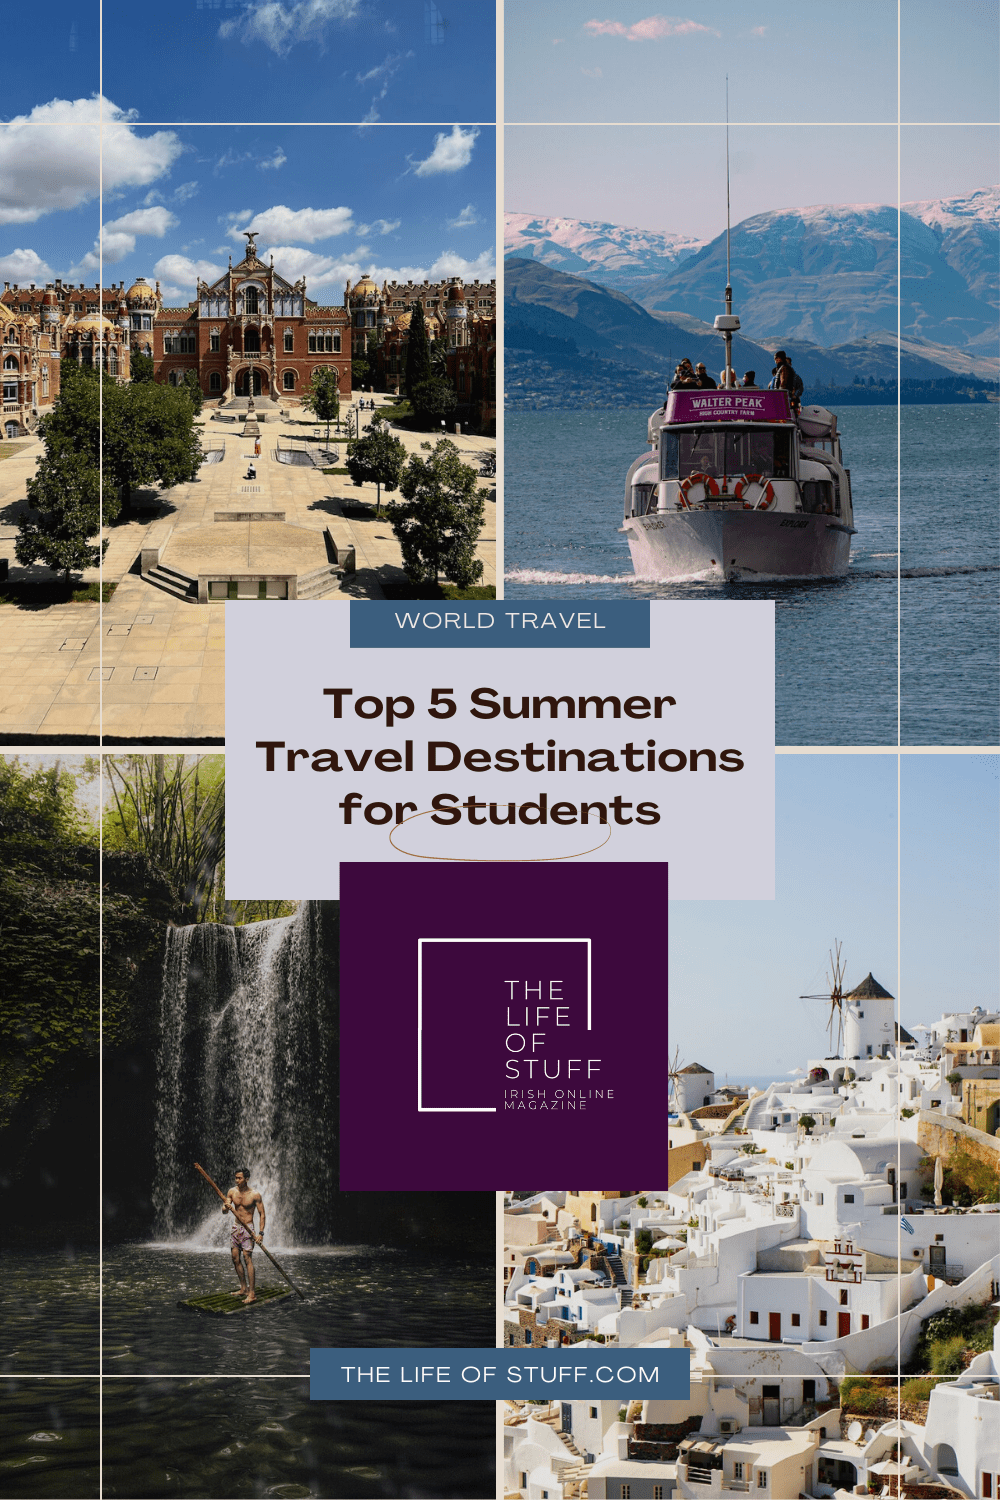 Top 5 Summer Travel Destinations for Students - The Life of Stuff